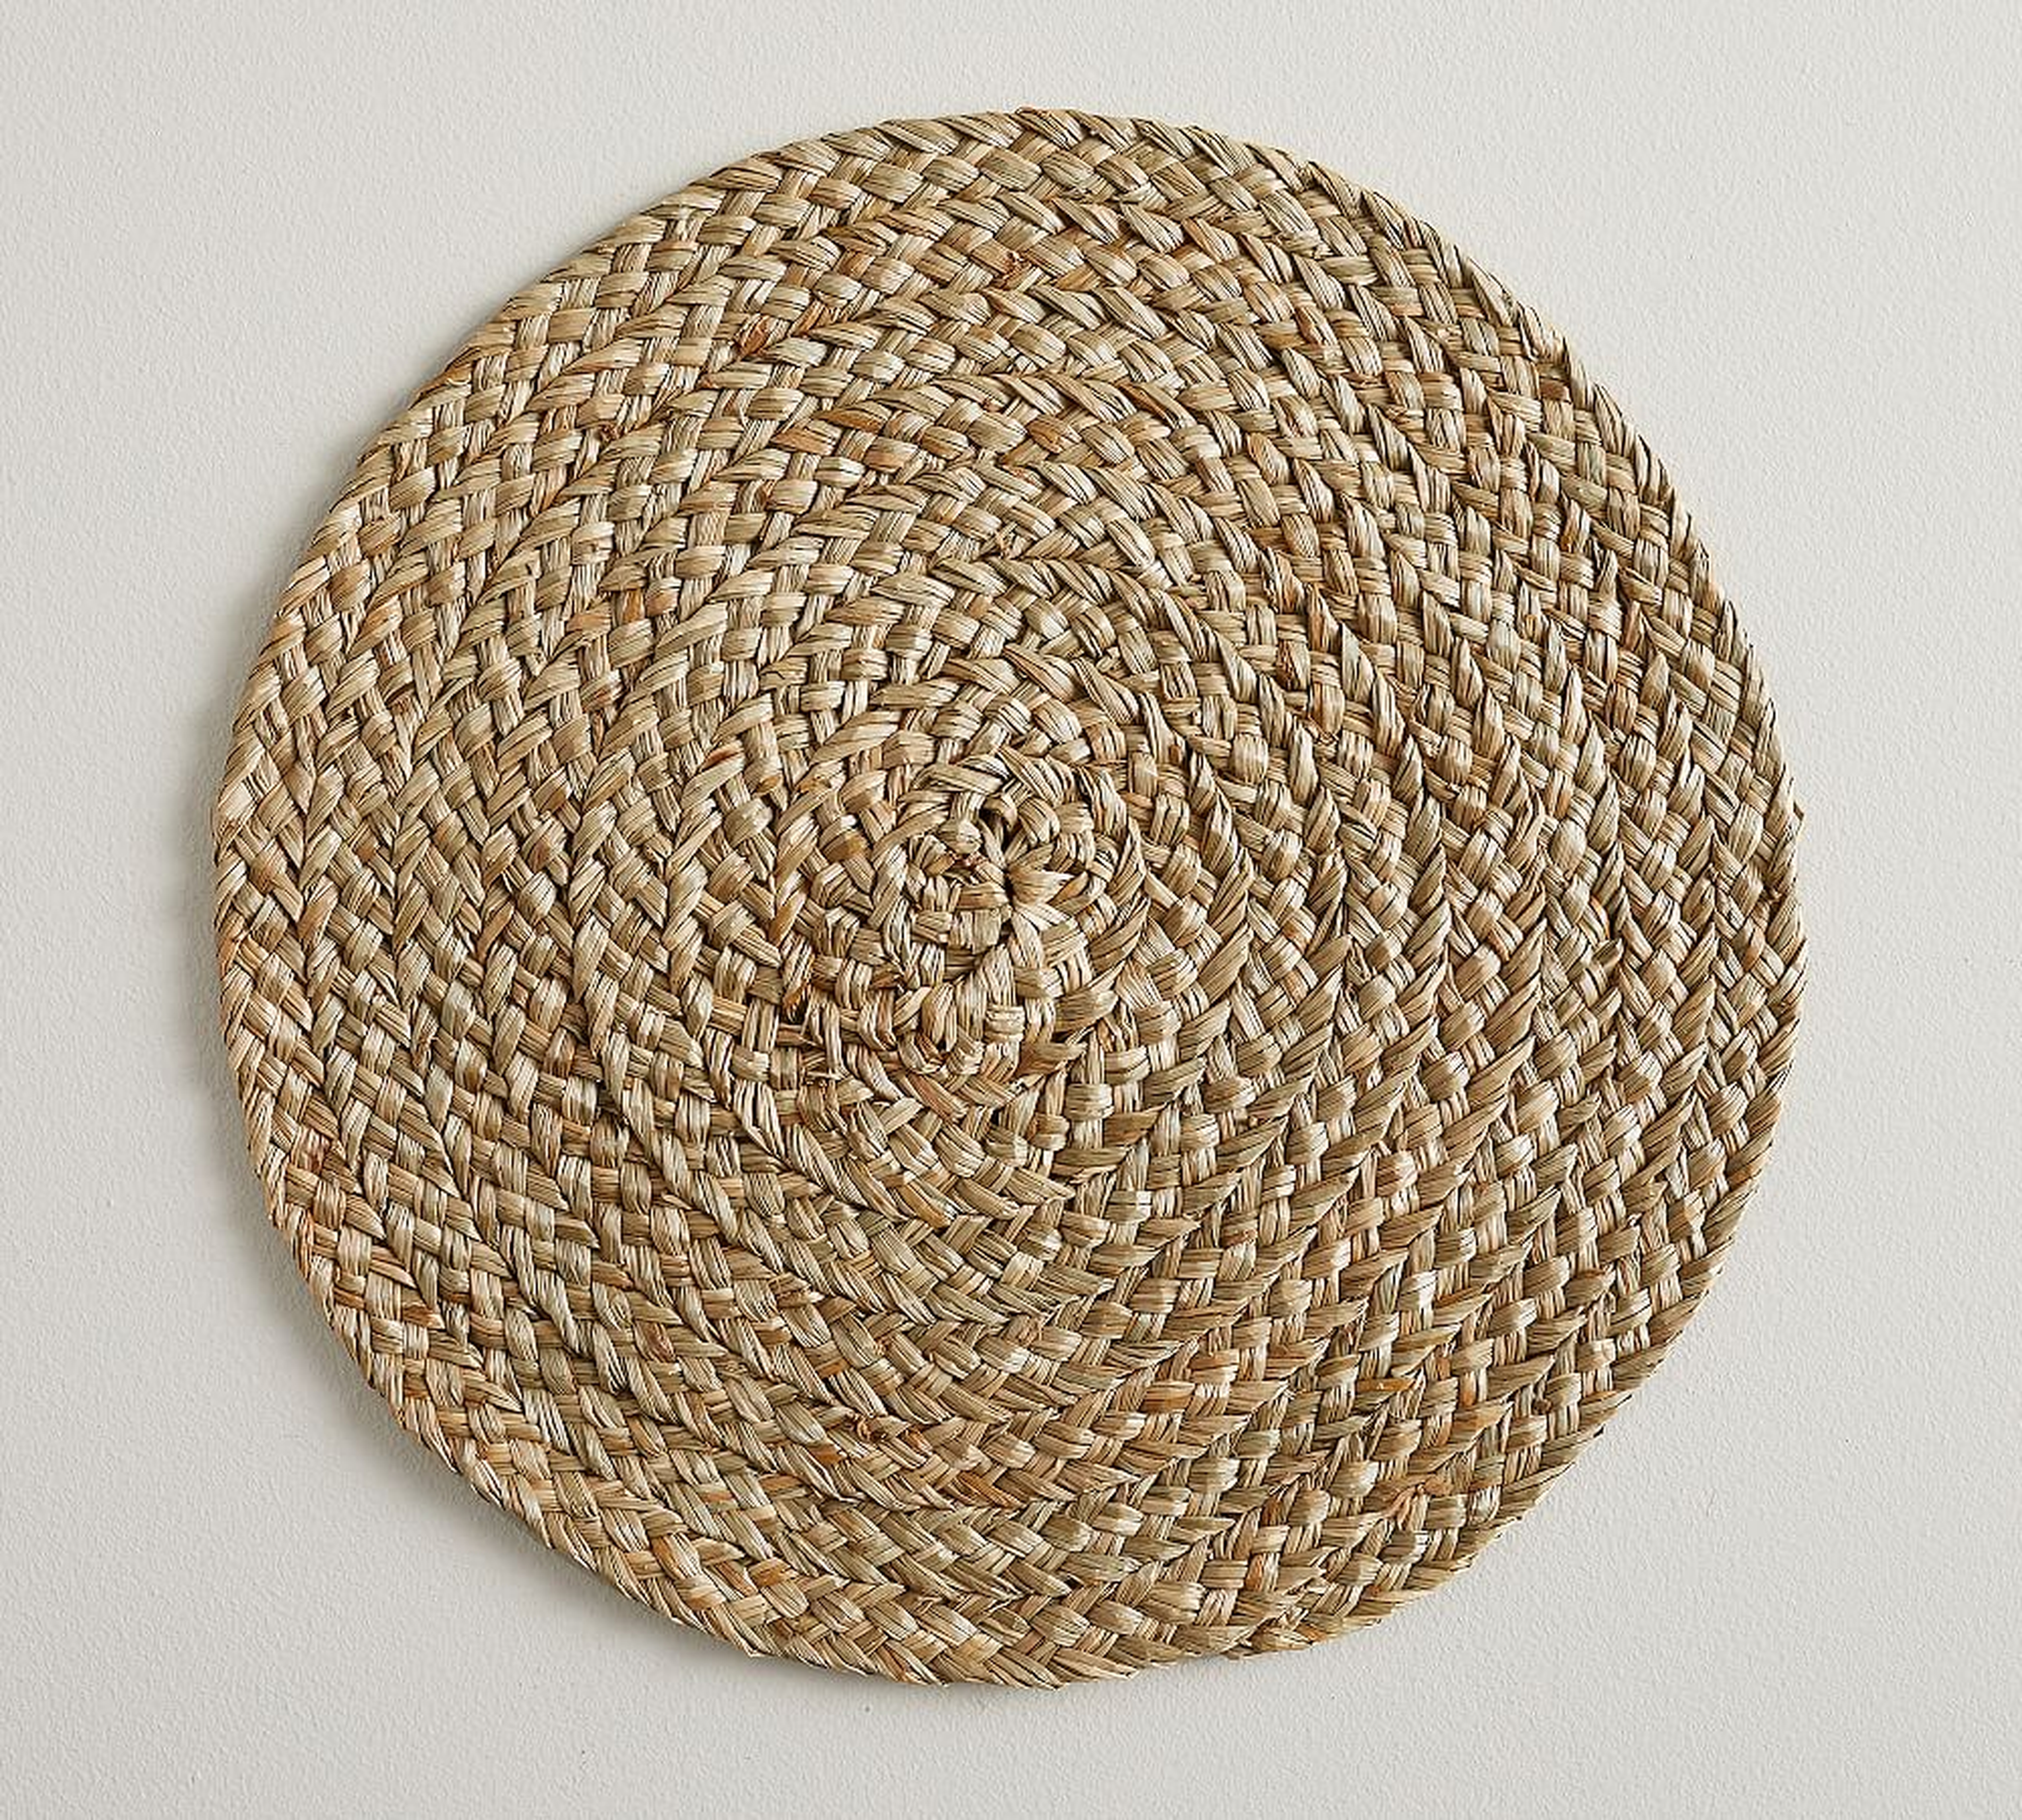 Braided Grass Charger Plate - Light Natural - Pottery Barn